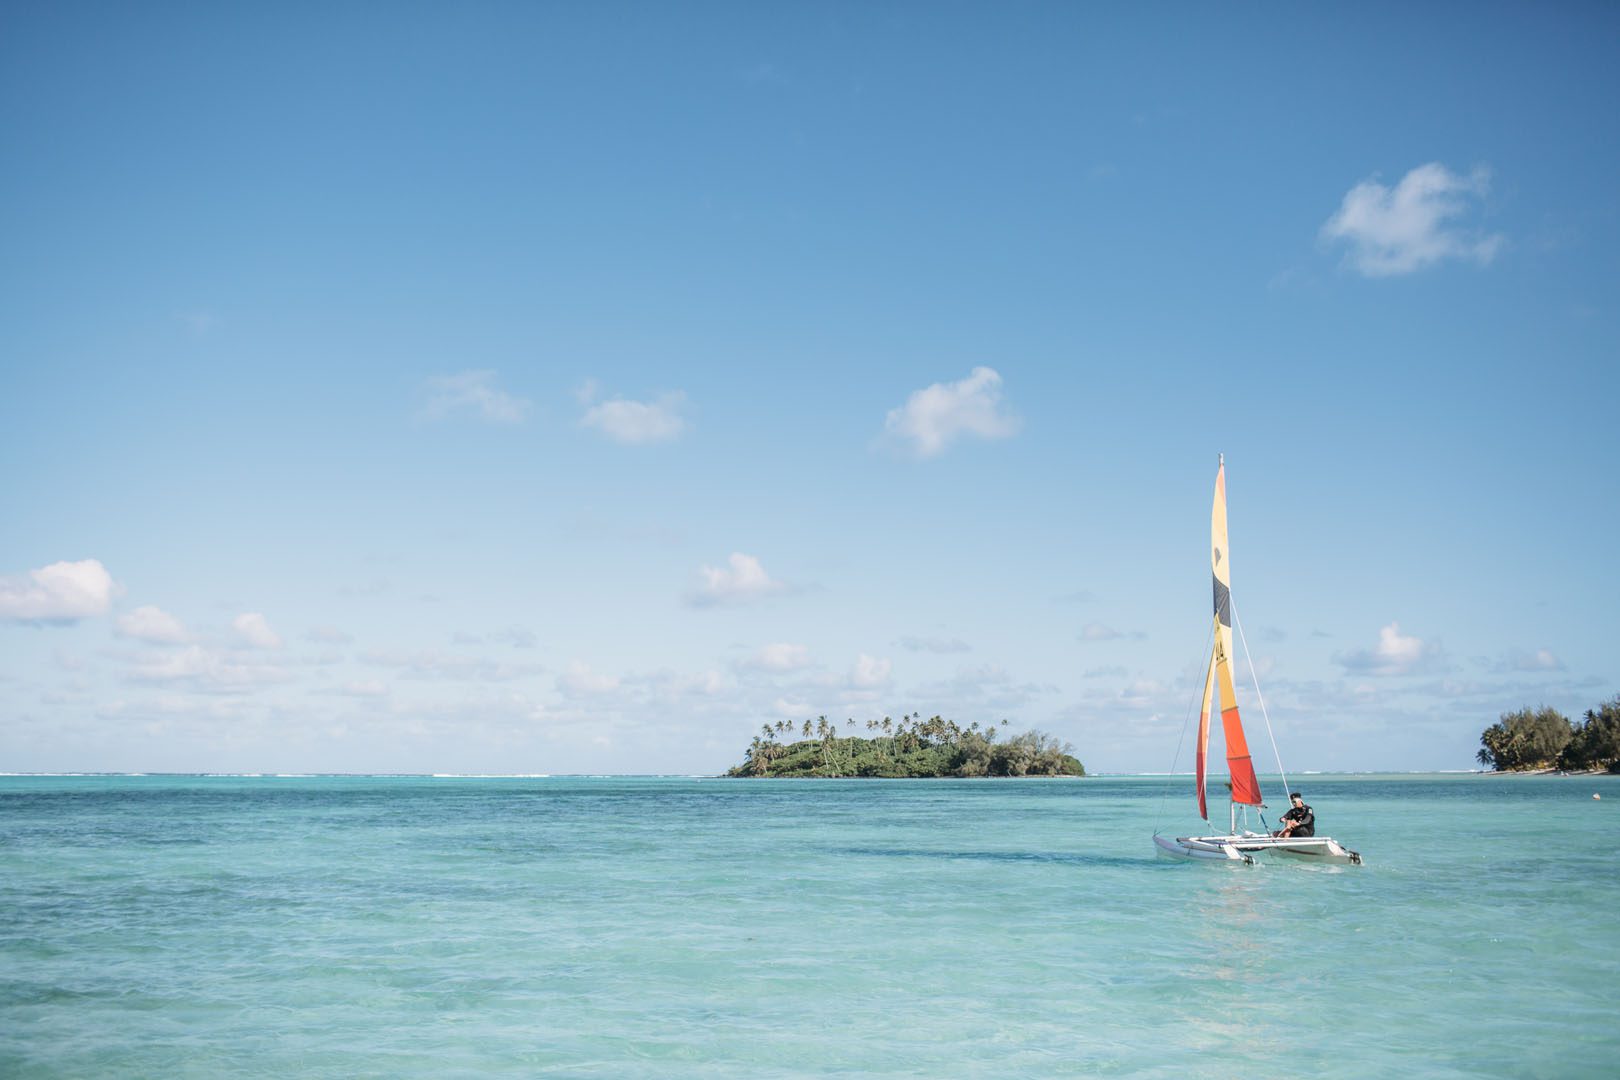 A resort guest exploring the Muri lagoon on a Sail Boat